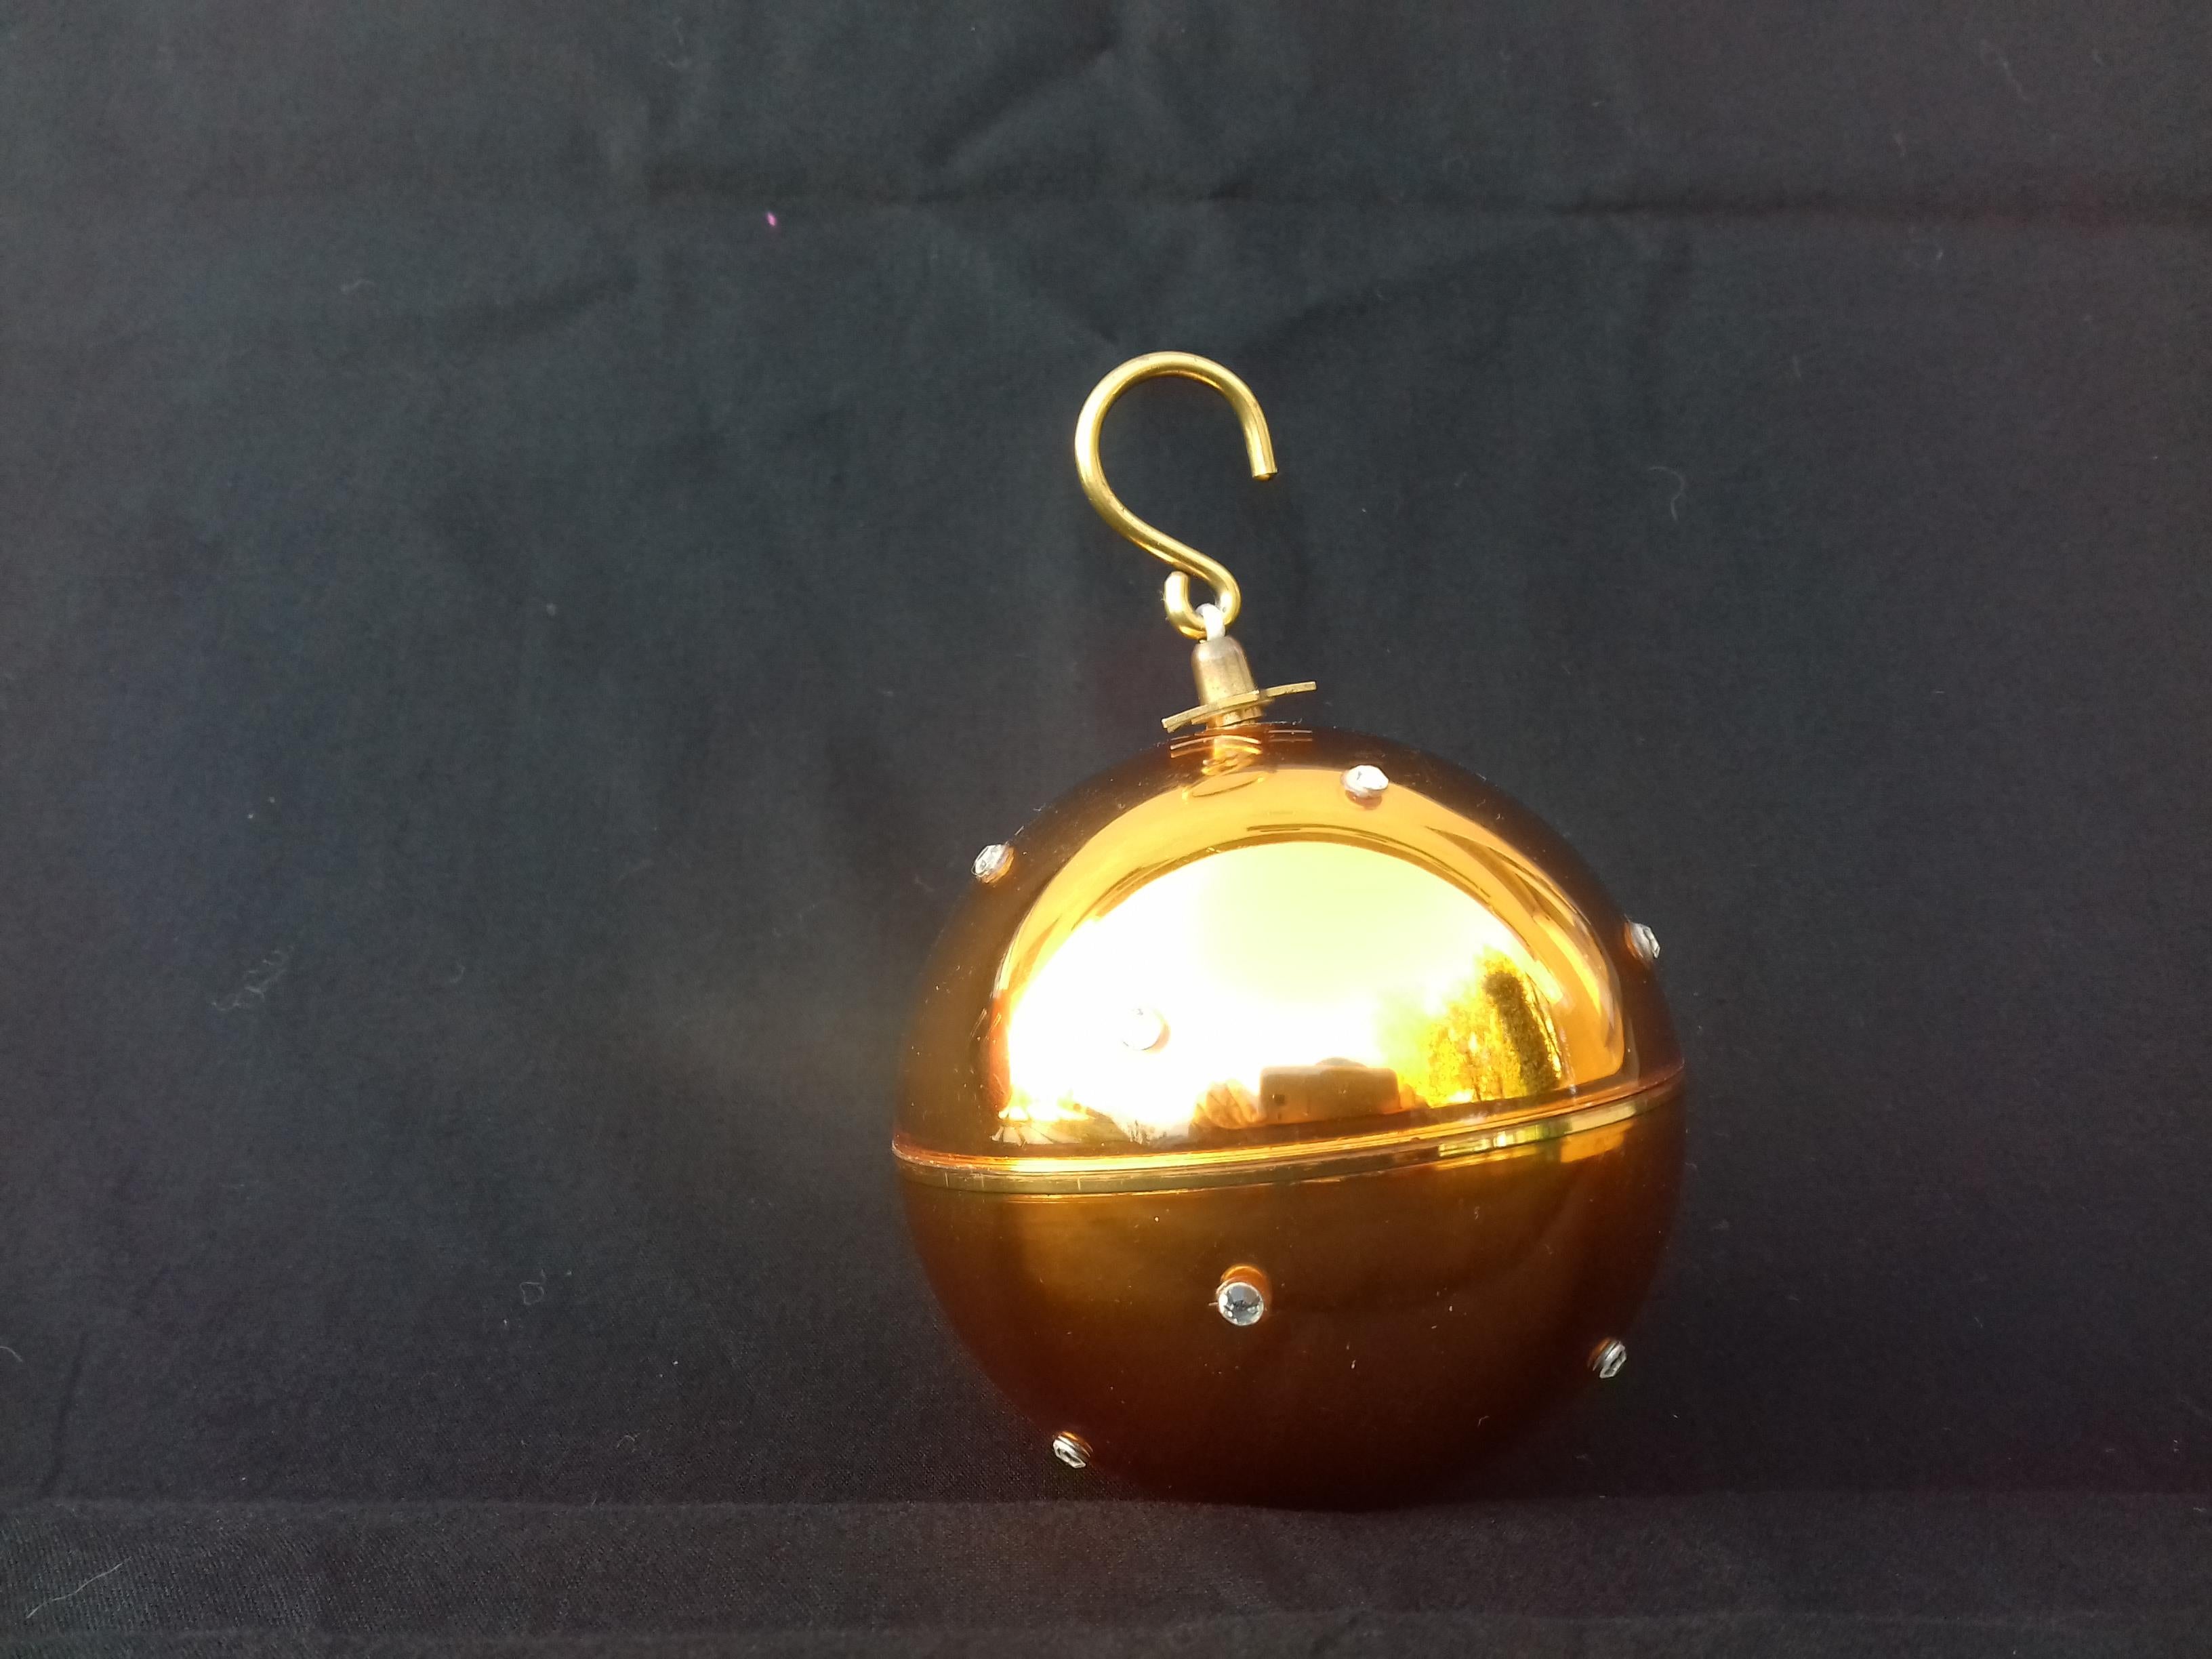 Pull the hook, hang it safely in your Christmas tree, and just hear and look at the magic of Christmas 

Rare and Gorgeous Christmas Ball Music Box !

Pull the hook, a string will come out and go into the ball playing 